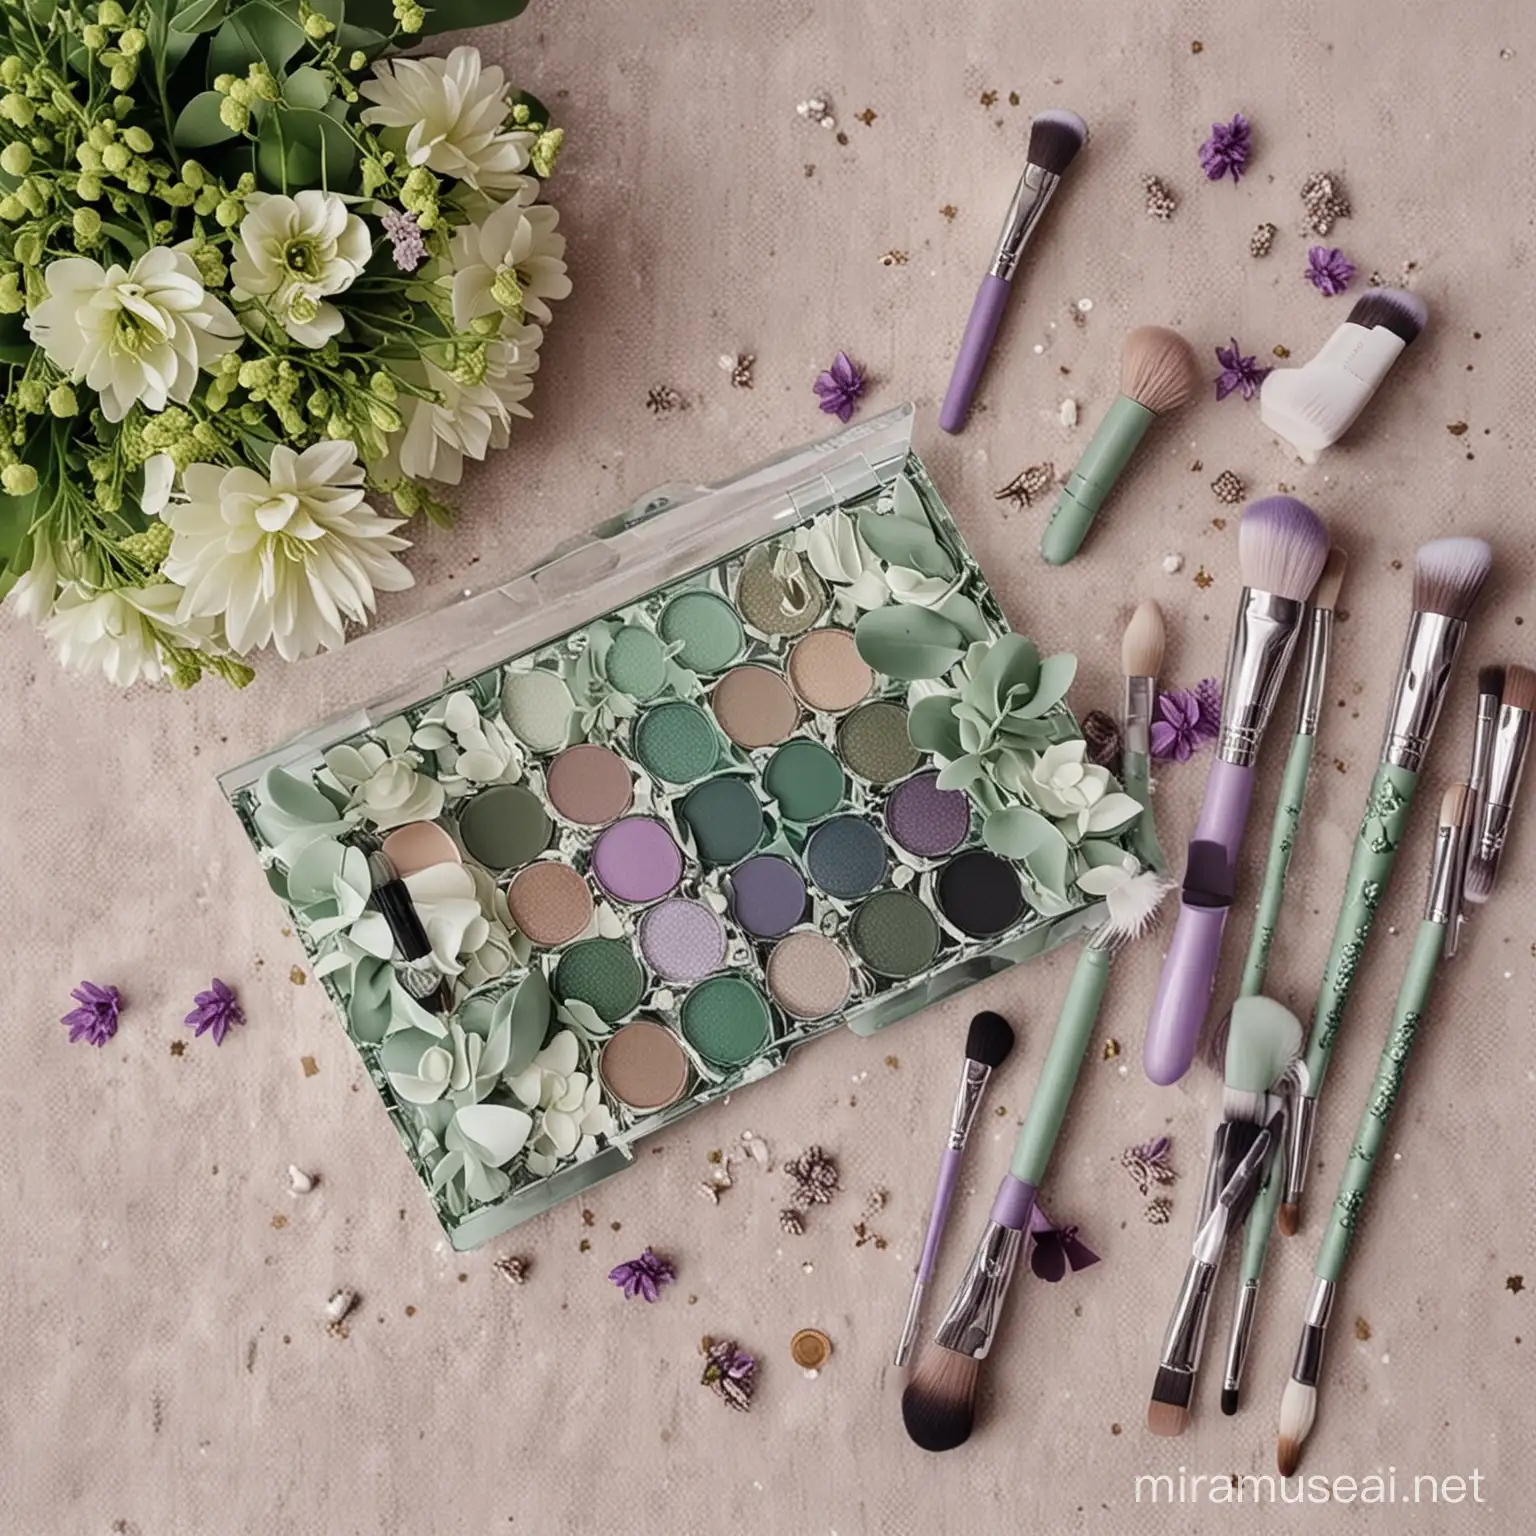 Makeup Brushes and Eyeshadow Palette with Green Flowers and Lilac Accessories